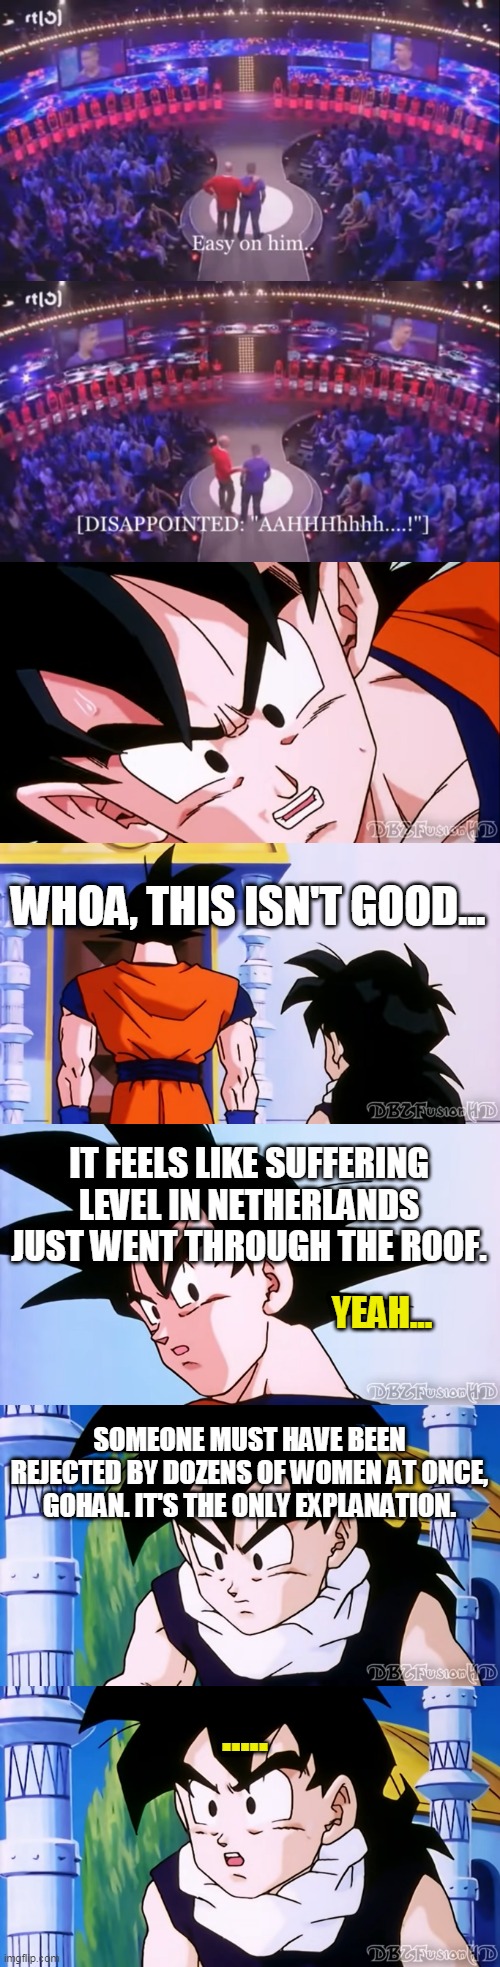 Johnny Rejection DBZ | WHOA, THIS ISN'T GOOD... IT FEELS LIKE SUFFERING LEVEL IN NETHERLANDS JUST WENT THROUGH THE ROOF. YEAH... SOMEONE MUST HAVE BEEN REJECTED BY DOZENS OF WOMEN AT ONCE, GOHAN. IT'S THE ONLY EXPLANATION. ..... | image tagged in johnny hague rejection,the most interesting man in the world,the hague,netherlands,speed dating,dating sucks | made w/ Imgflip meme maker